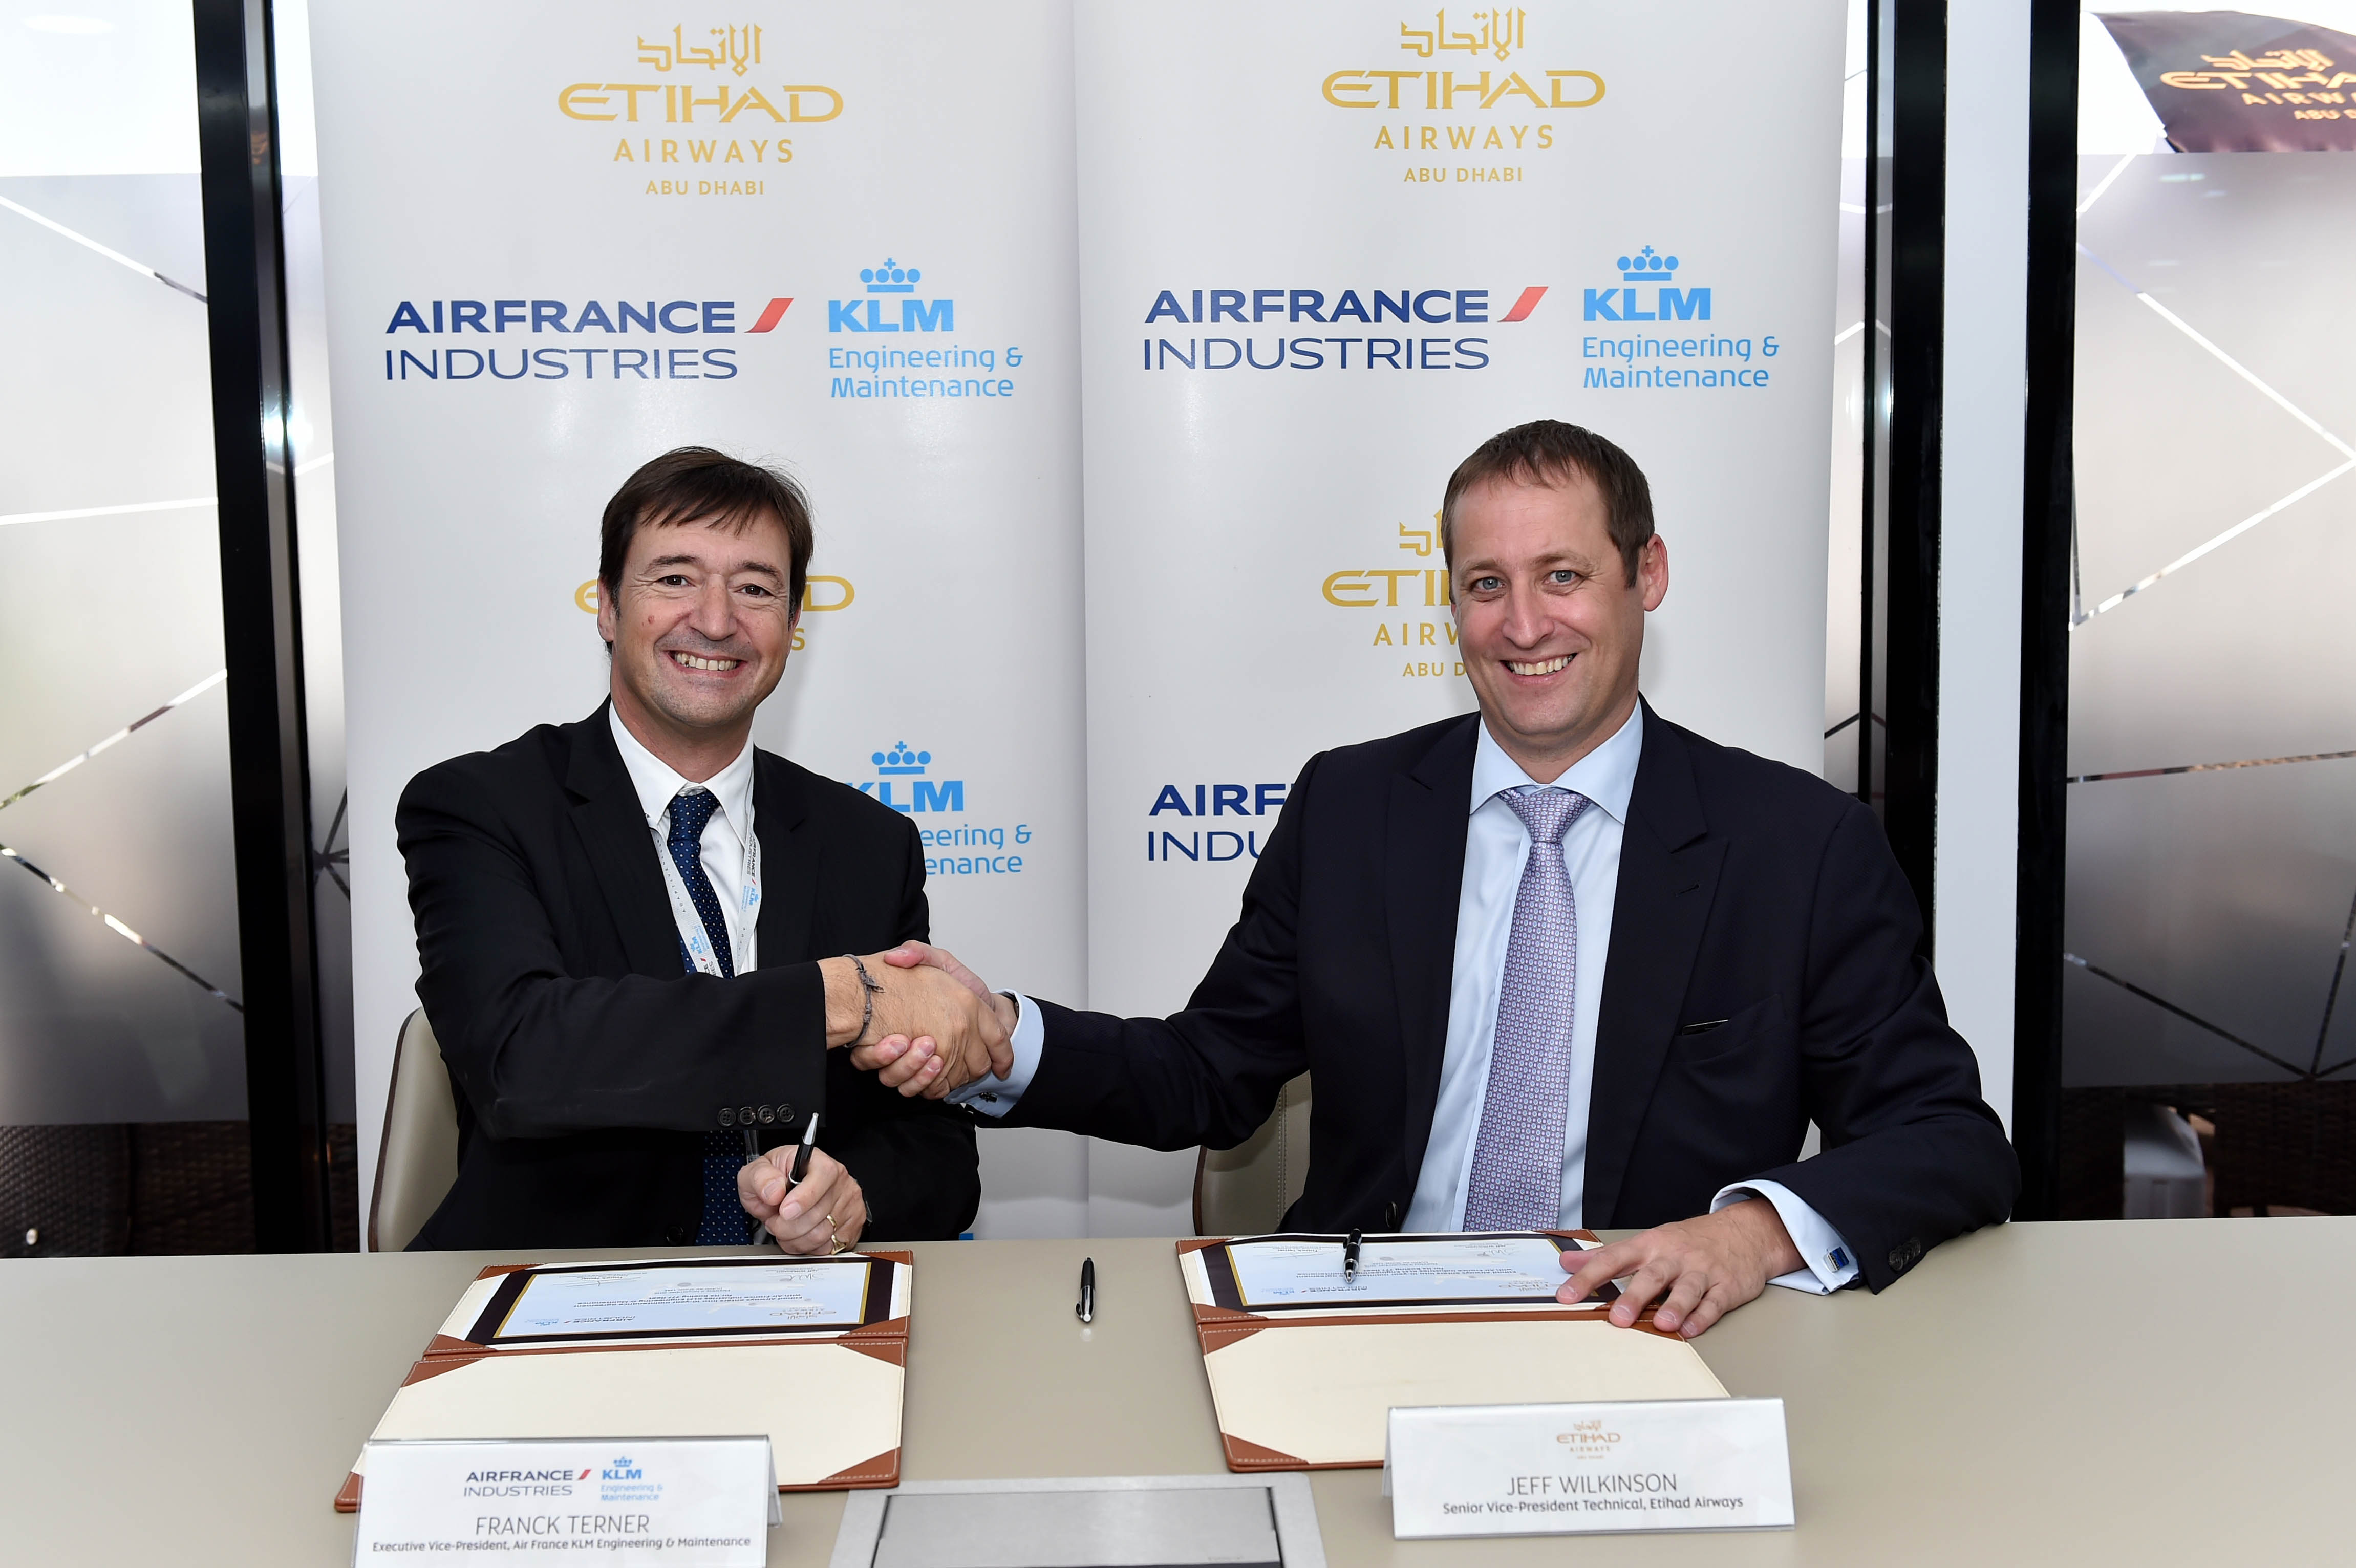 Picture Caption: Jeff Wilkinson, Senior Vice President Technical of Etihad Airways, pictured right, with Franck Terner, Executive Vice President of Air France KLM Engineering & Maintenance, after signing a 10-year agreement for a component maintenance agreement for the carrier’s Boeing 777 fleet.